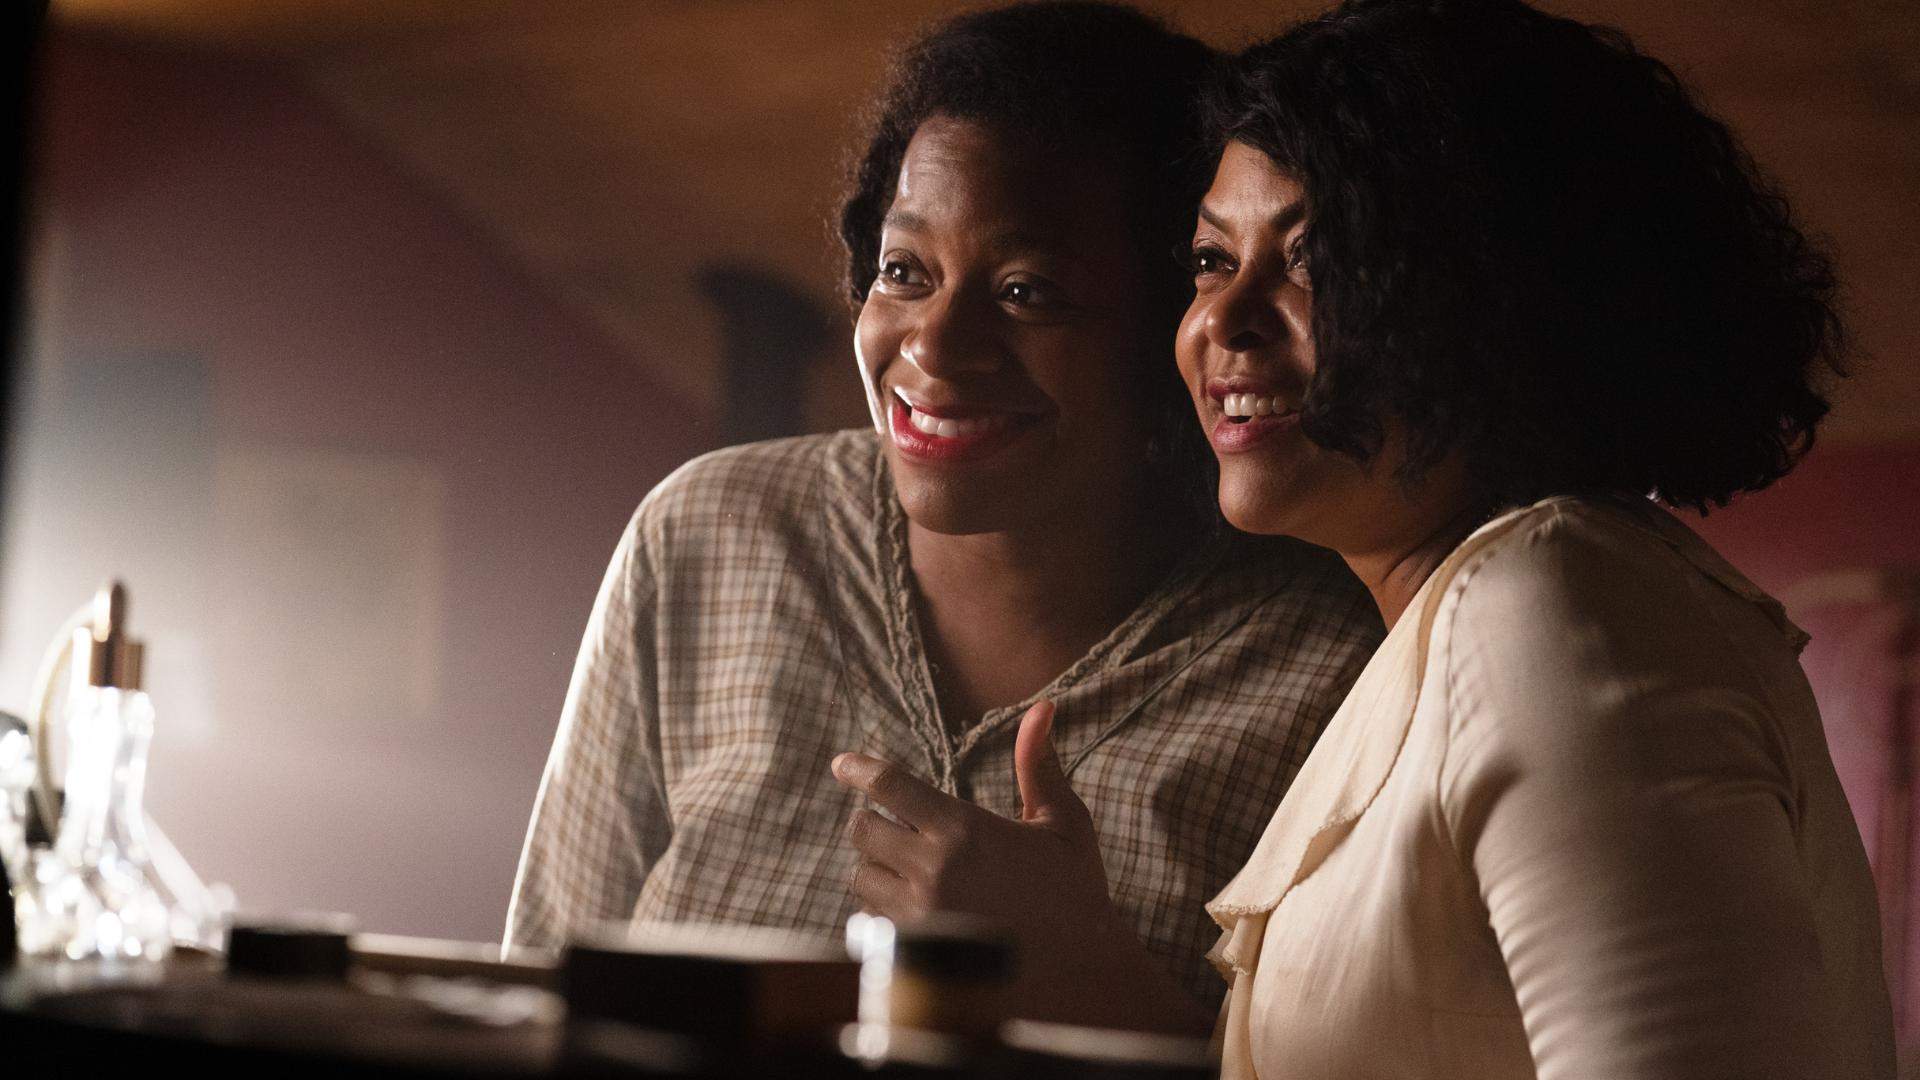 Five Things You Need to Know About the New Film 'The Color Purple'